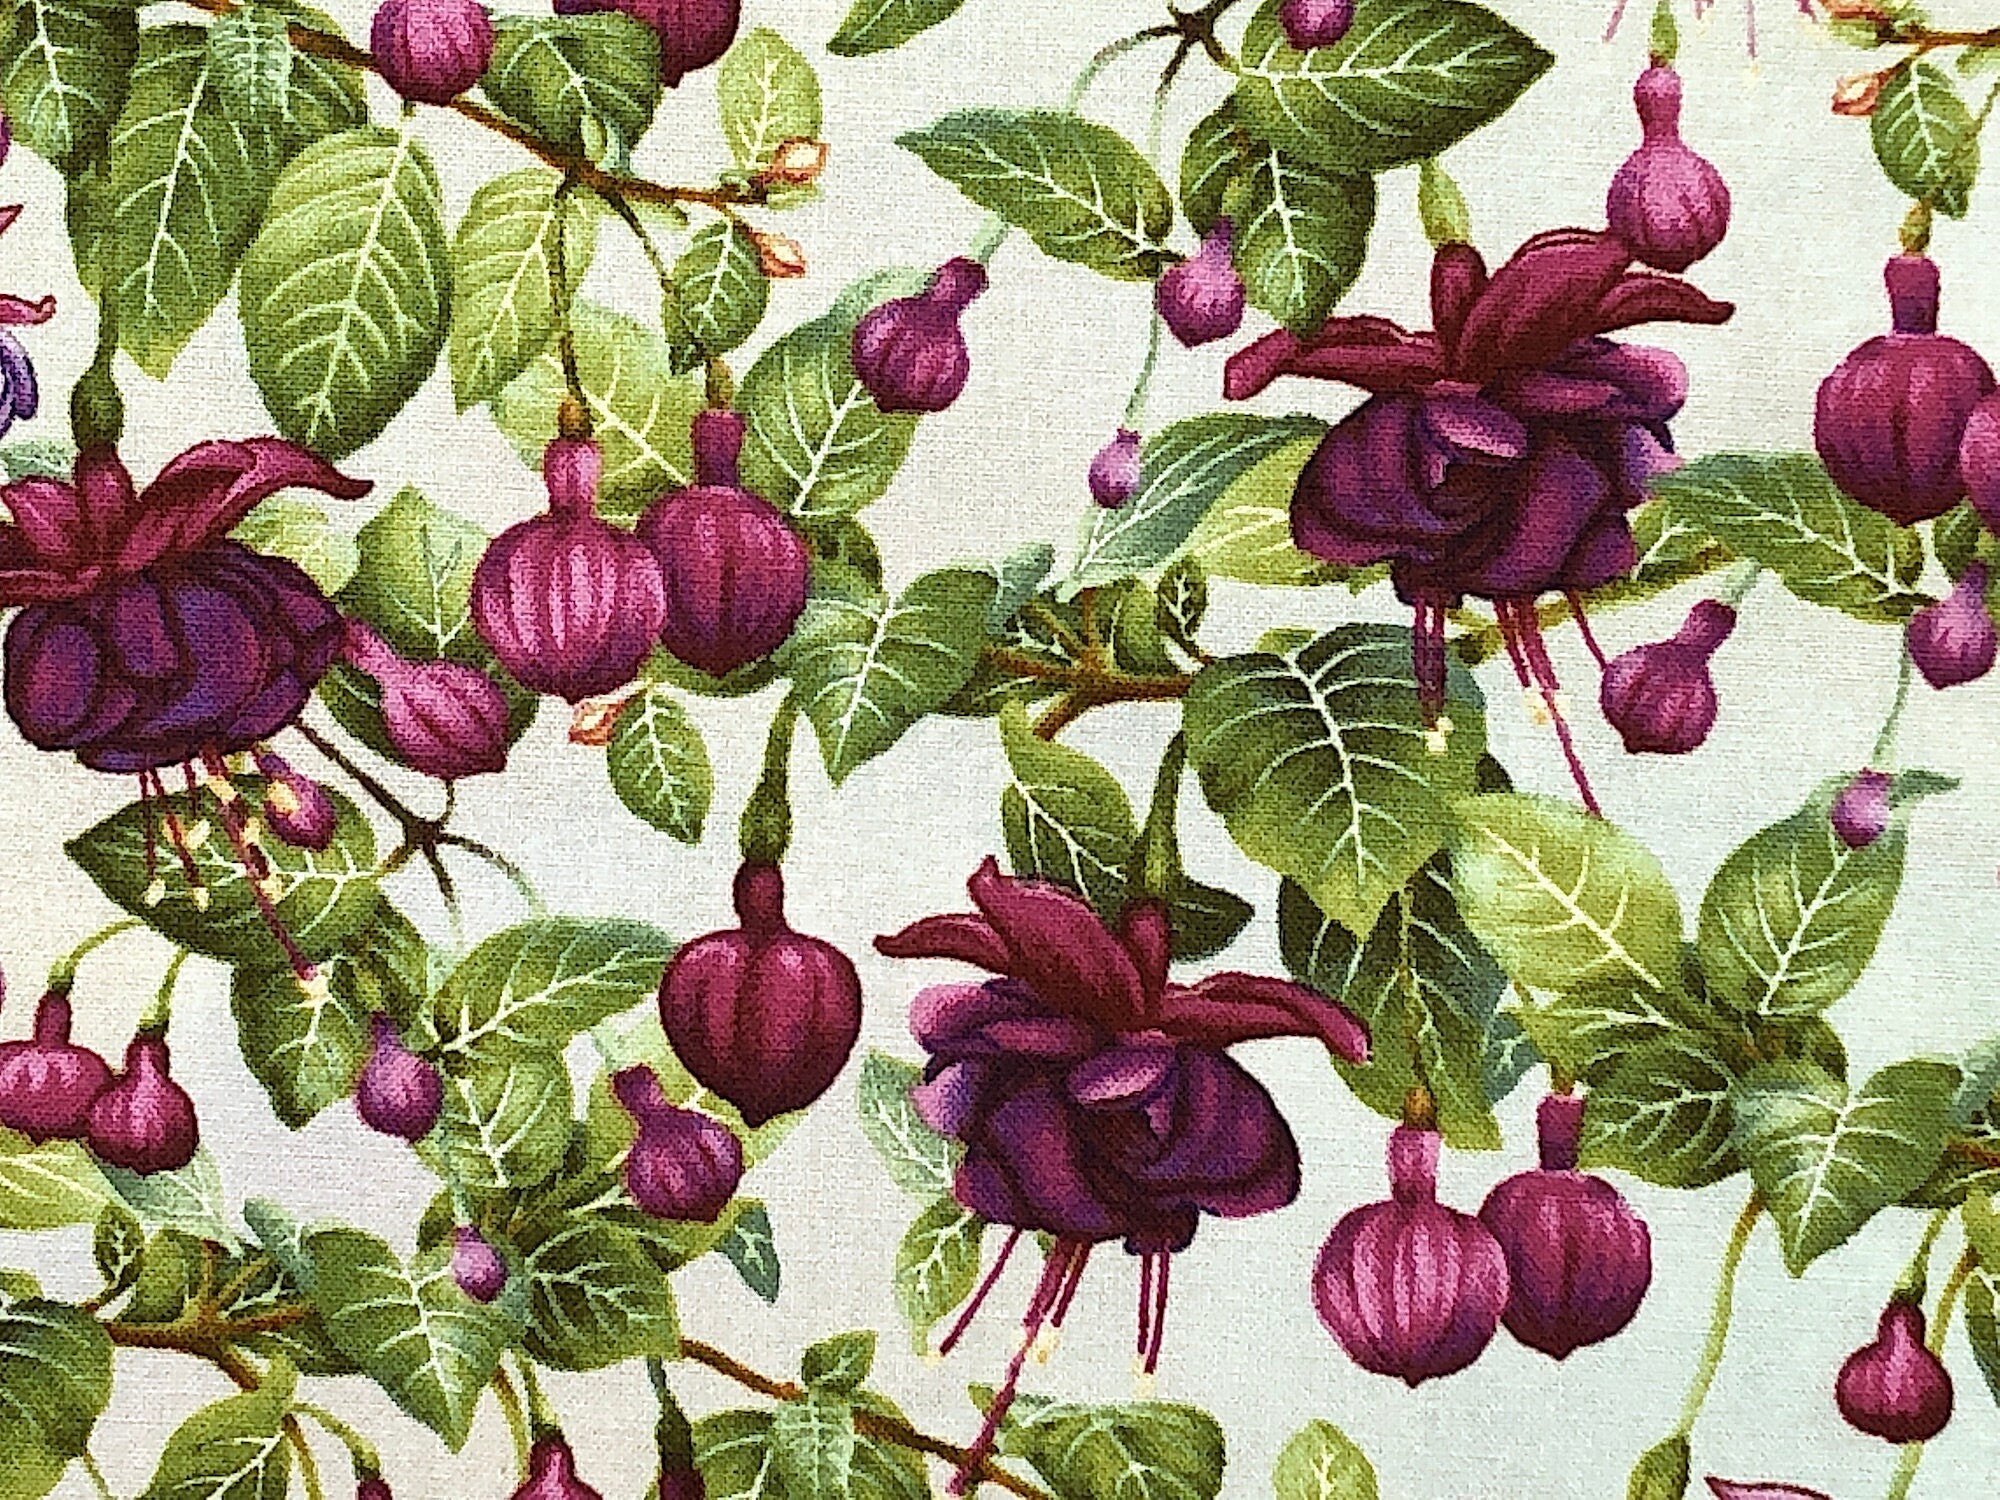 Here is a pretty cotton fabric of Blooming Fuchsias. The Fuchsia flower buds are shades of purple, pink and red with green leaves. The background is light tan, with shades of green and red throughout.